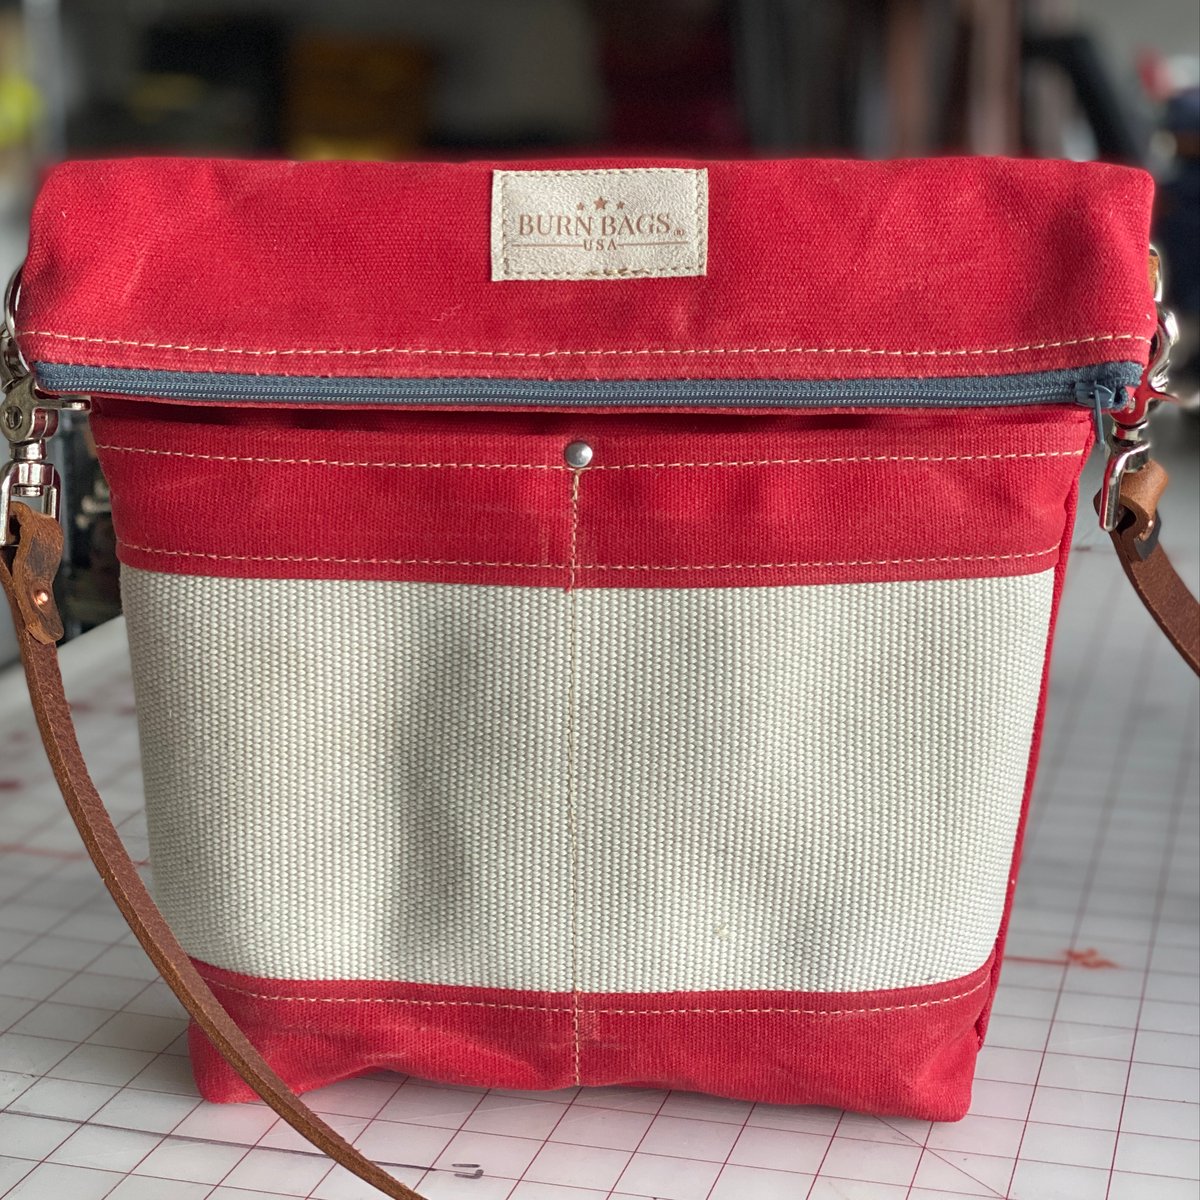 Bags, 1192 Euc Like New Womens Red Mod Purse With Fish Scale Design Unique